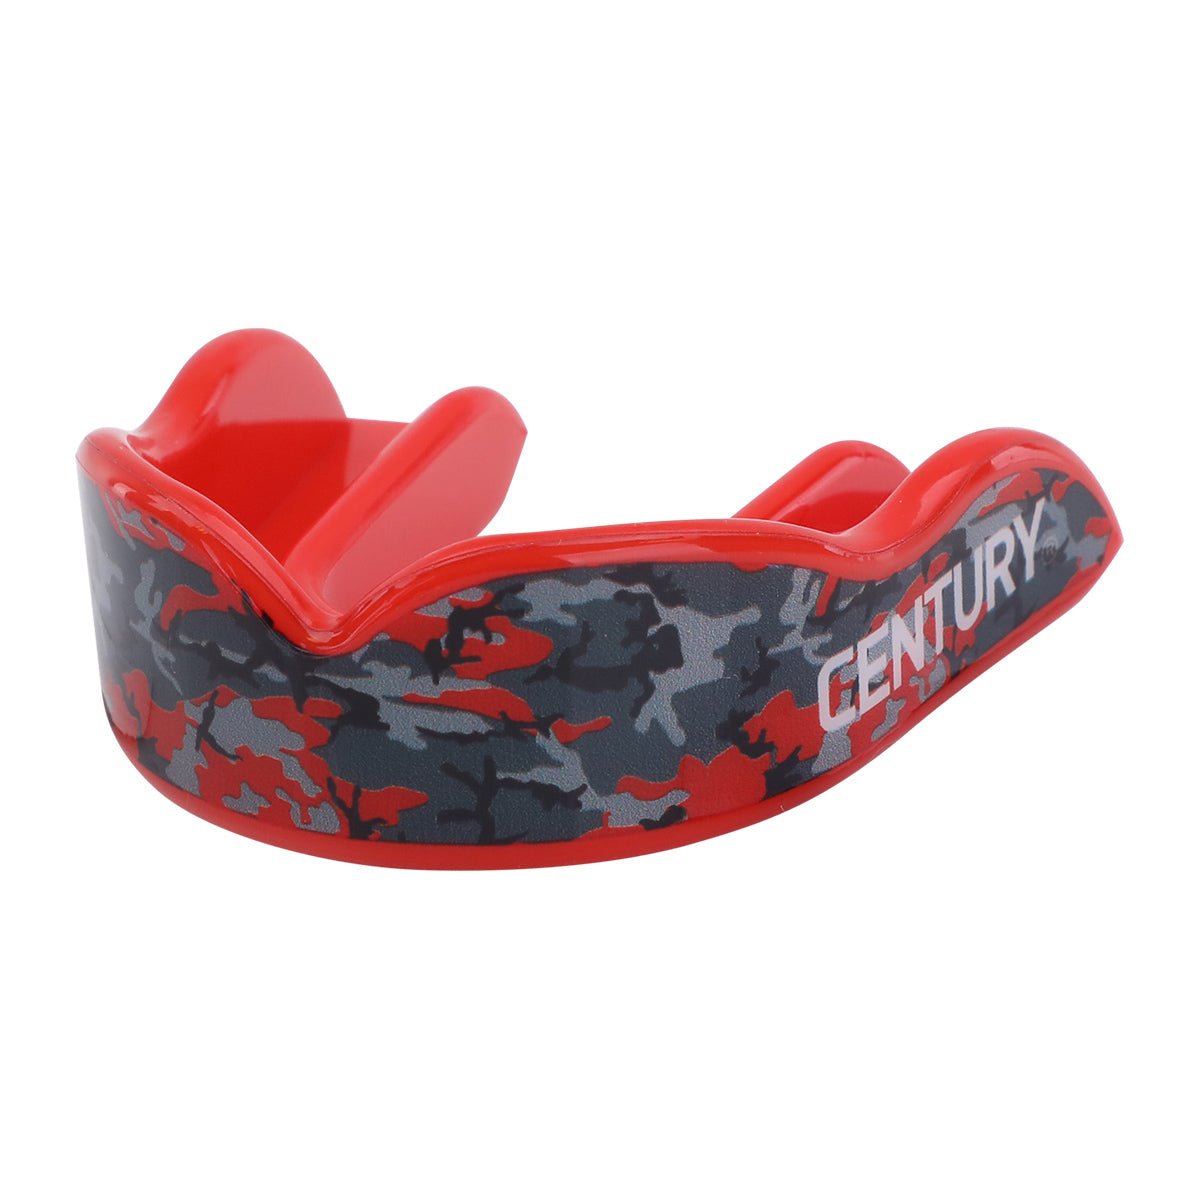 Warrior Mouthgaurd Youth Camo/Red